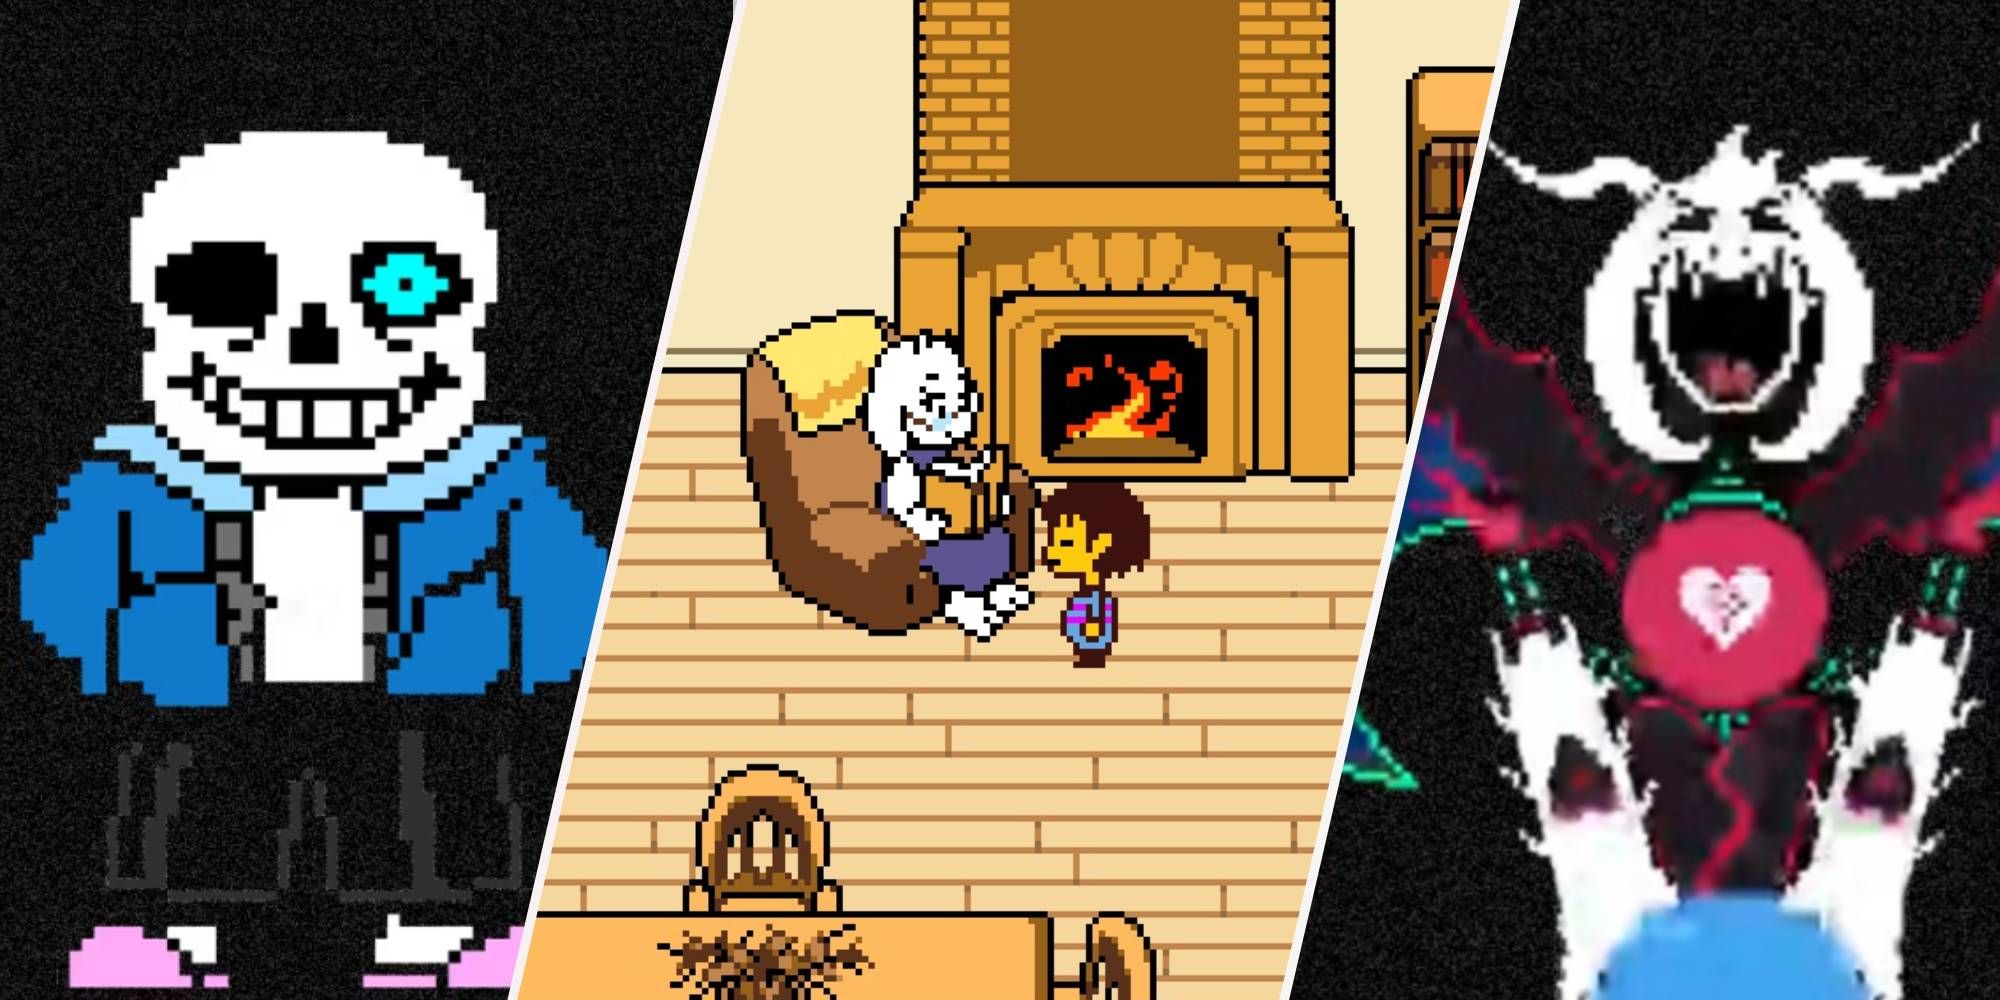 Undertale Toriel reading to the player characters with Sans nearby